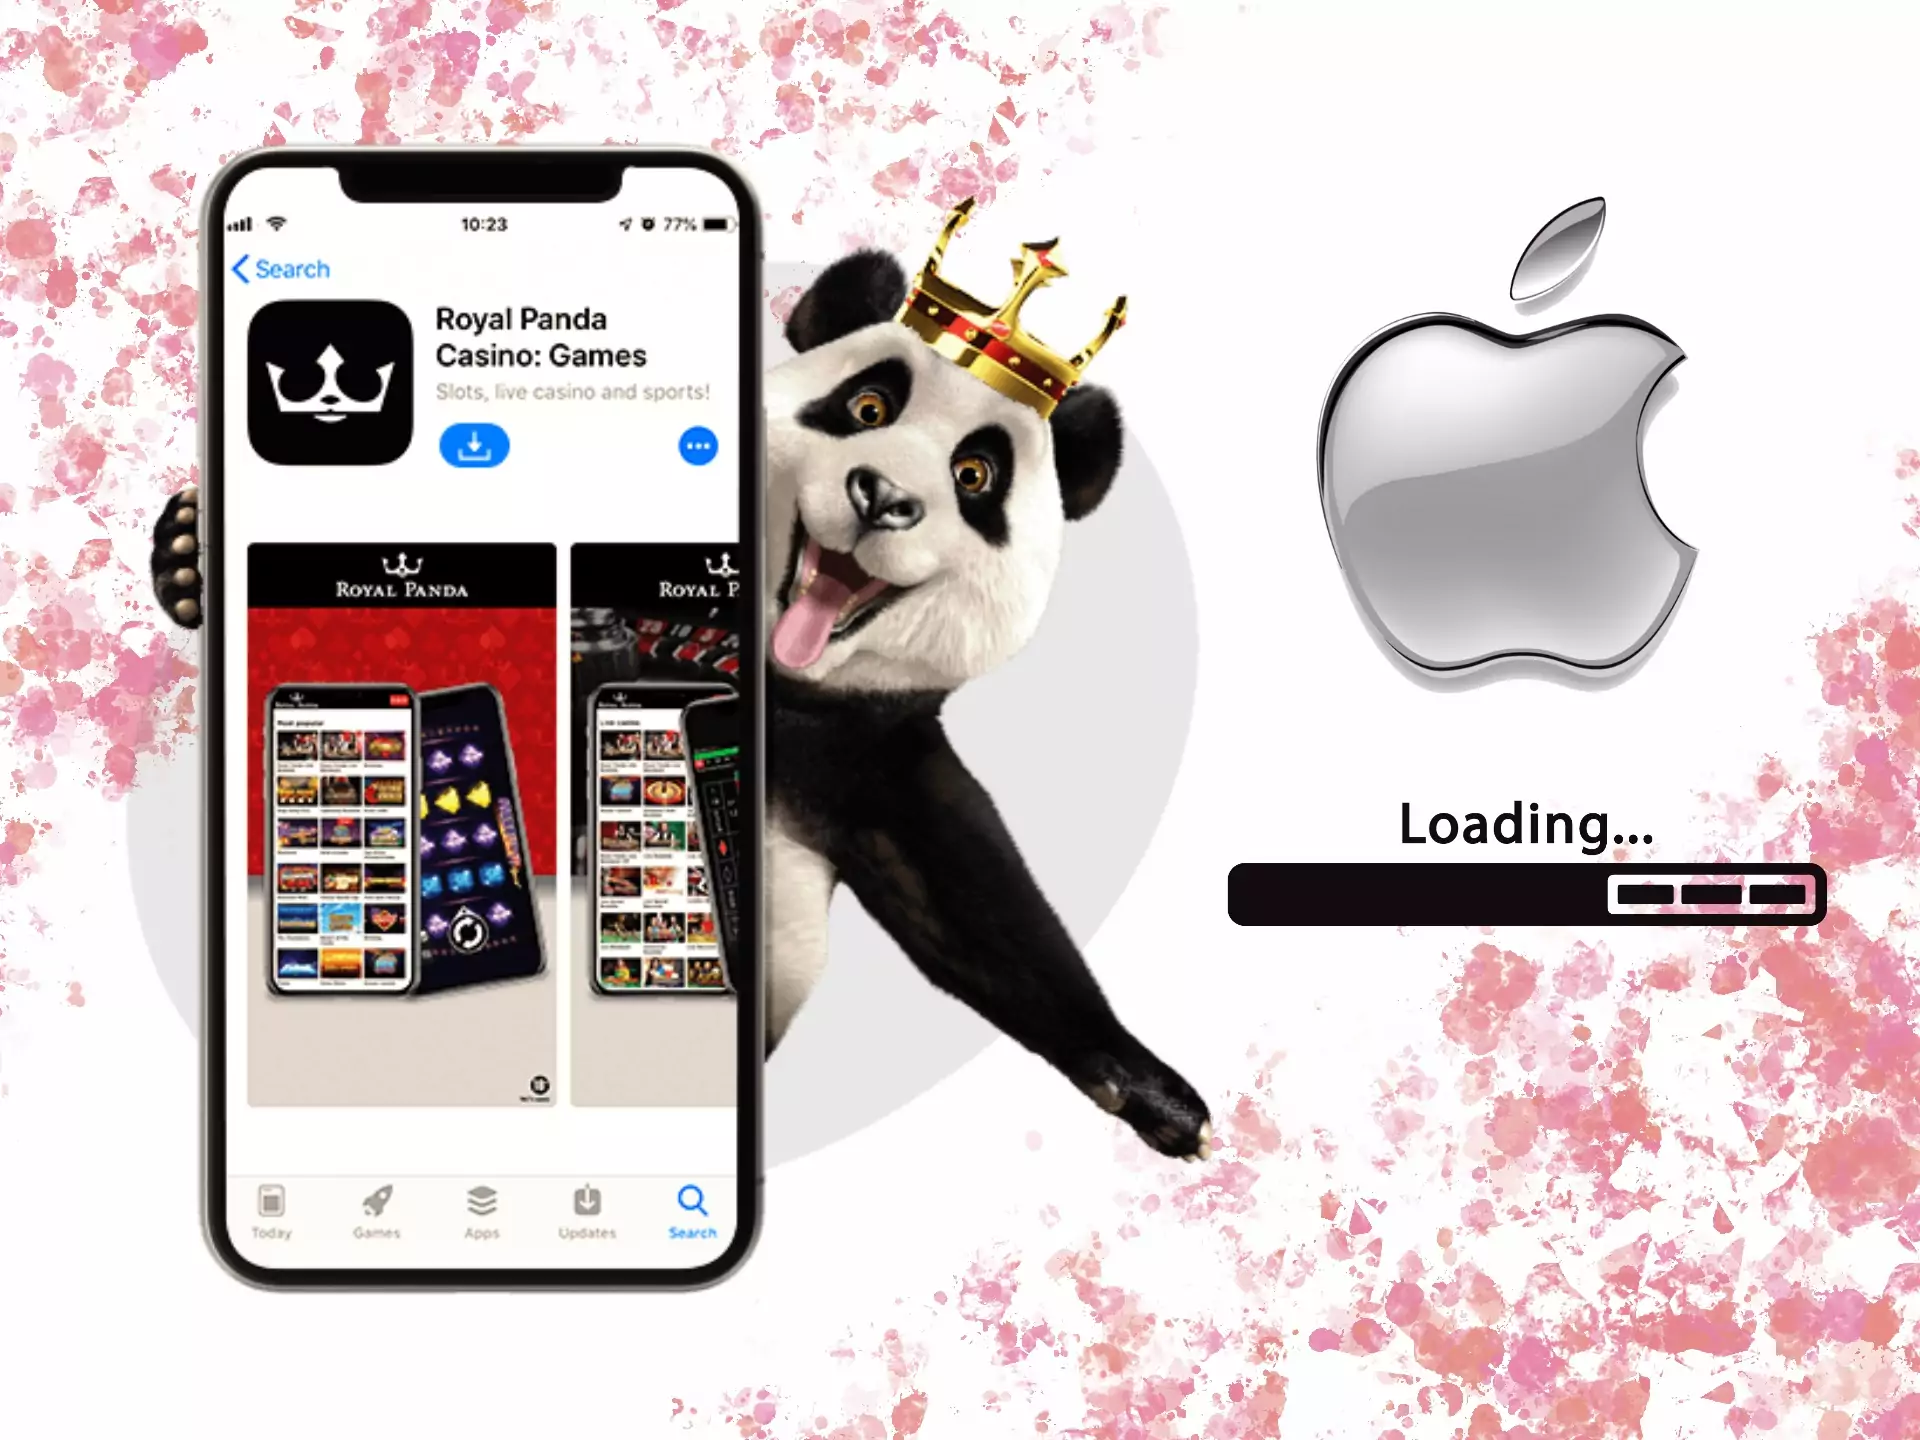 Install the Royal Panda app and start betting from your iPhone.